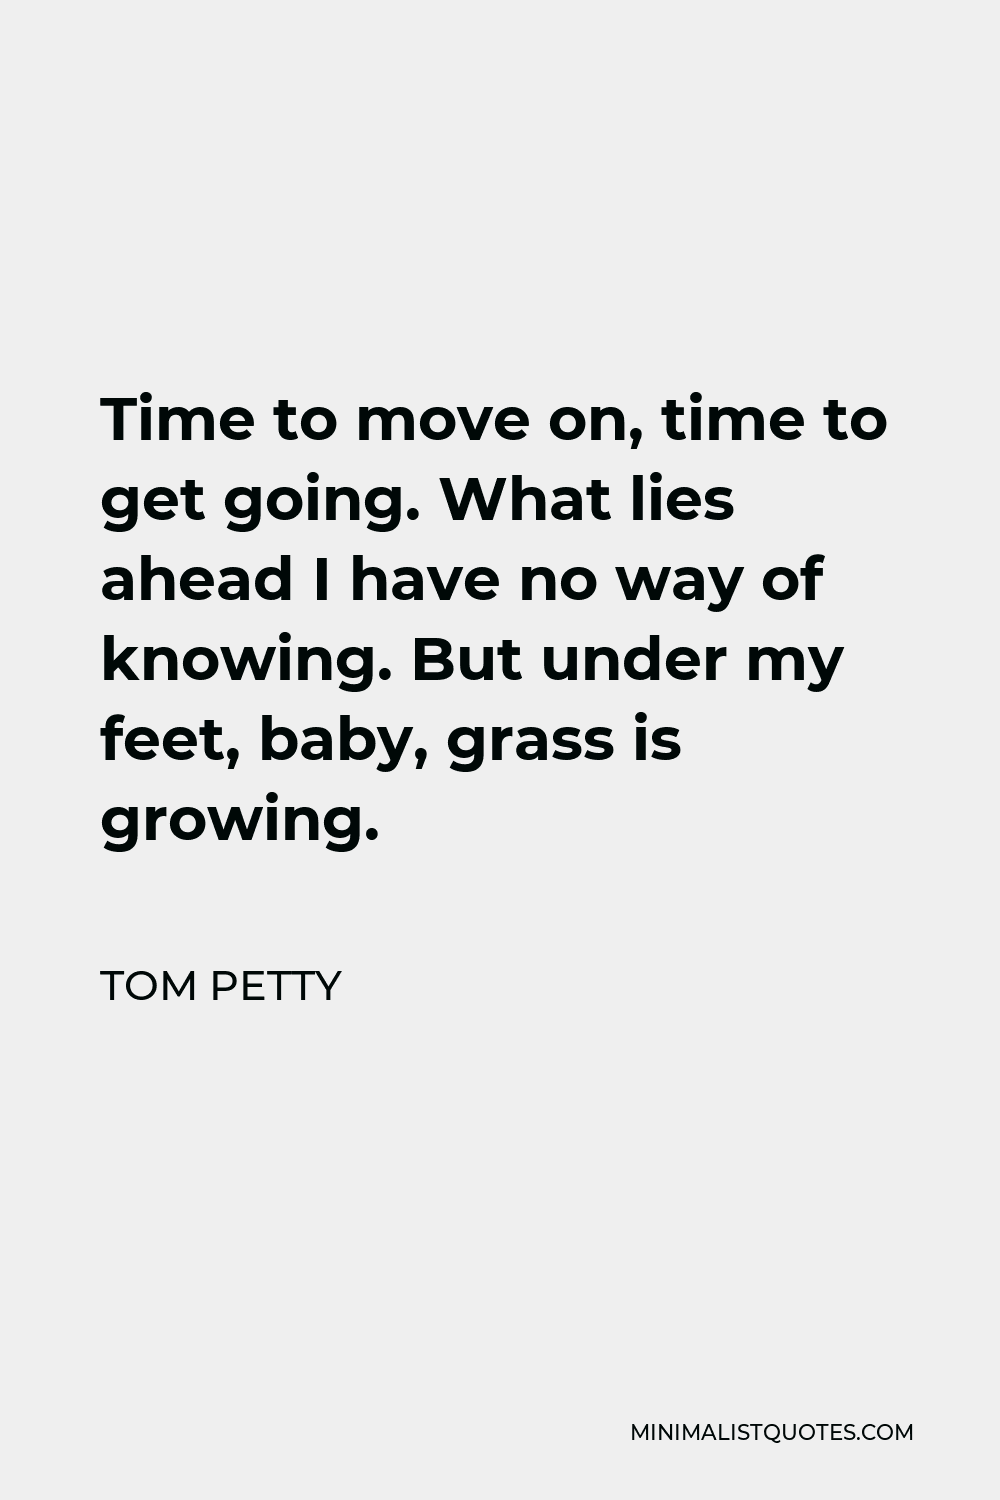 Tom Petty Quote - Time to move on, time to get going. What lies ahead I have no way of knowing. But under my feet, baby, grass is growing.